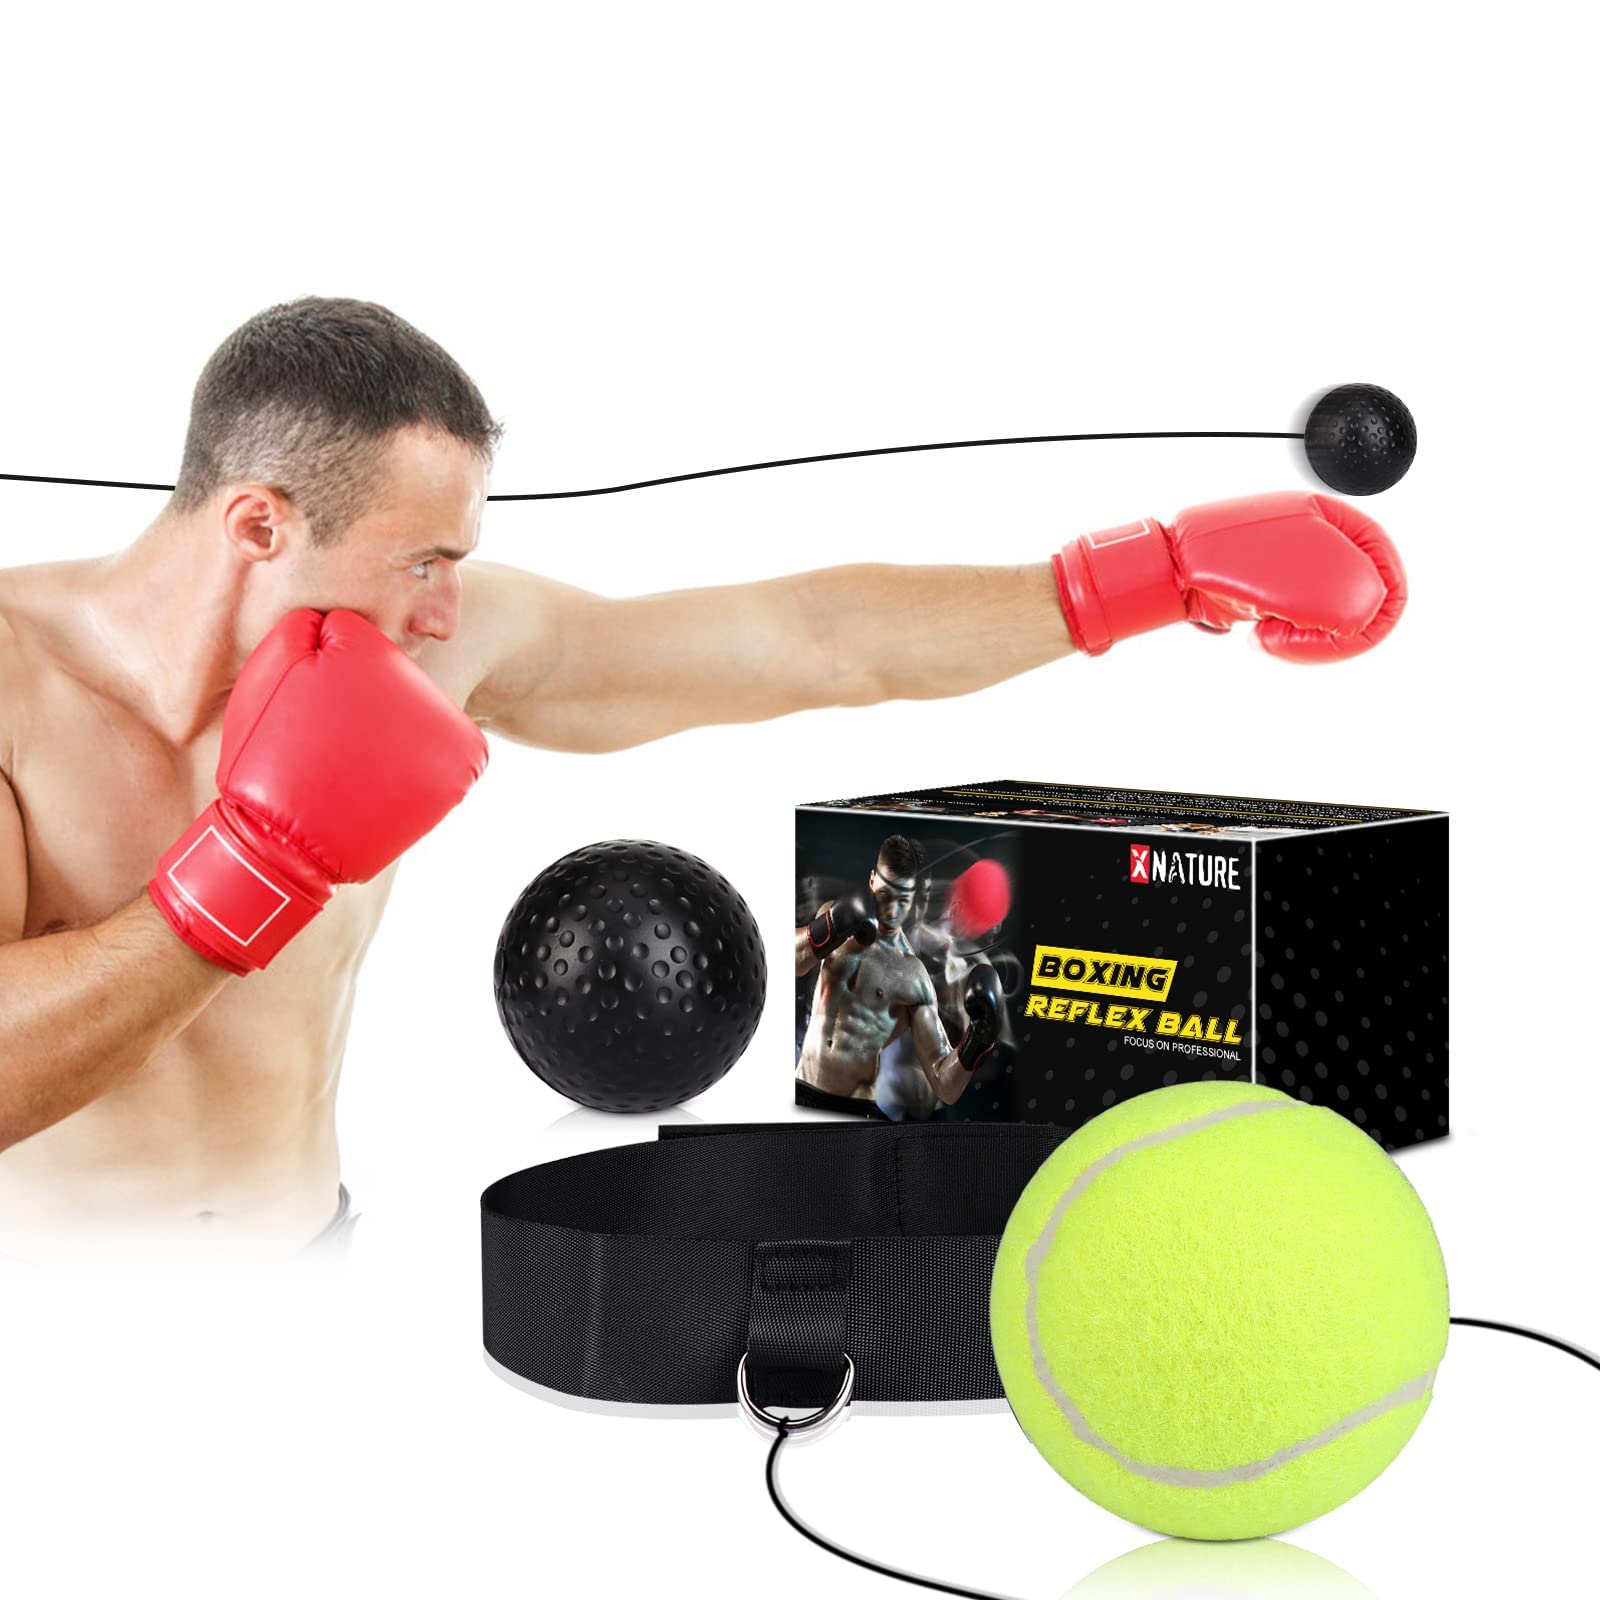 Boxing Reflex Ball, Improving Reaction Speed and Hand-Eye Coordination  Training Boxing Equipment for Training at Home, 2 React Reflex Ball with  Adjustable Headband Great for MMA Equipment, Boxing